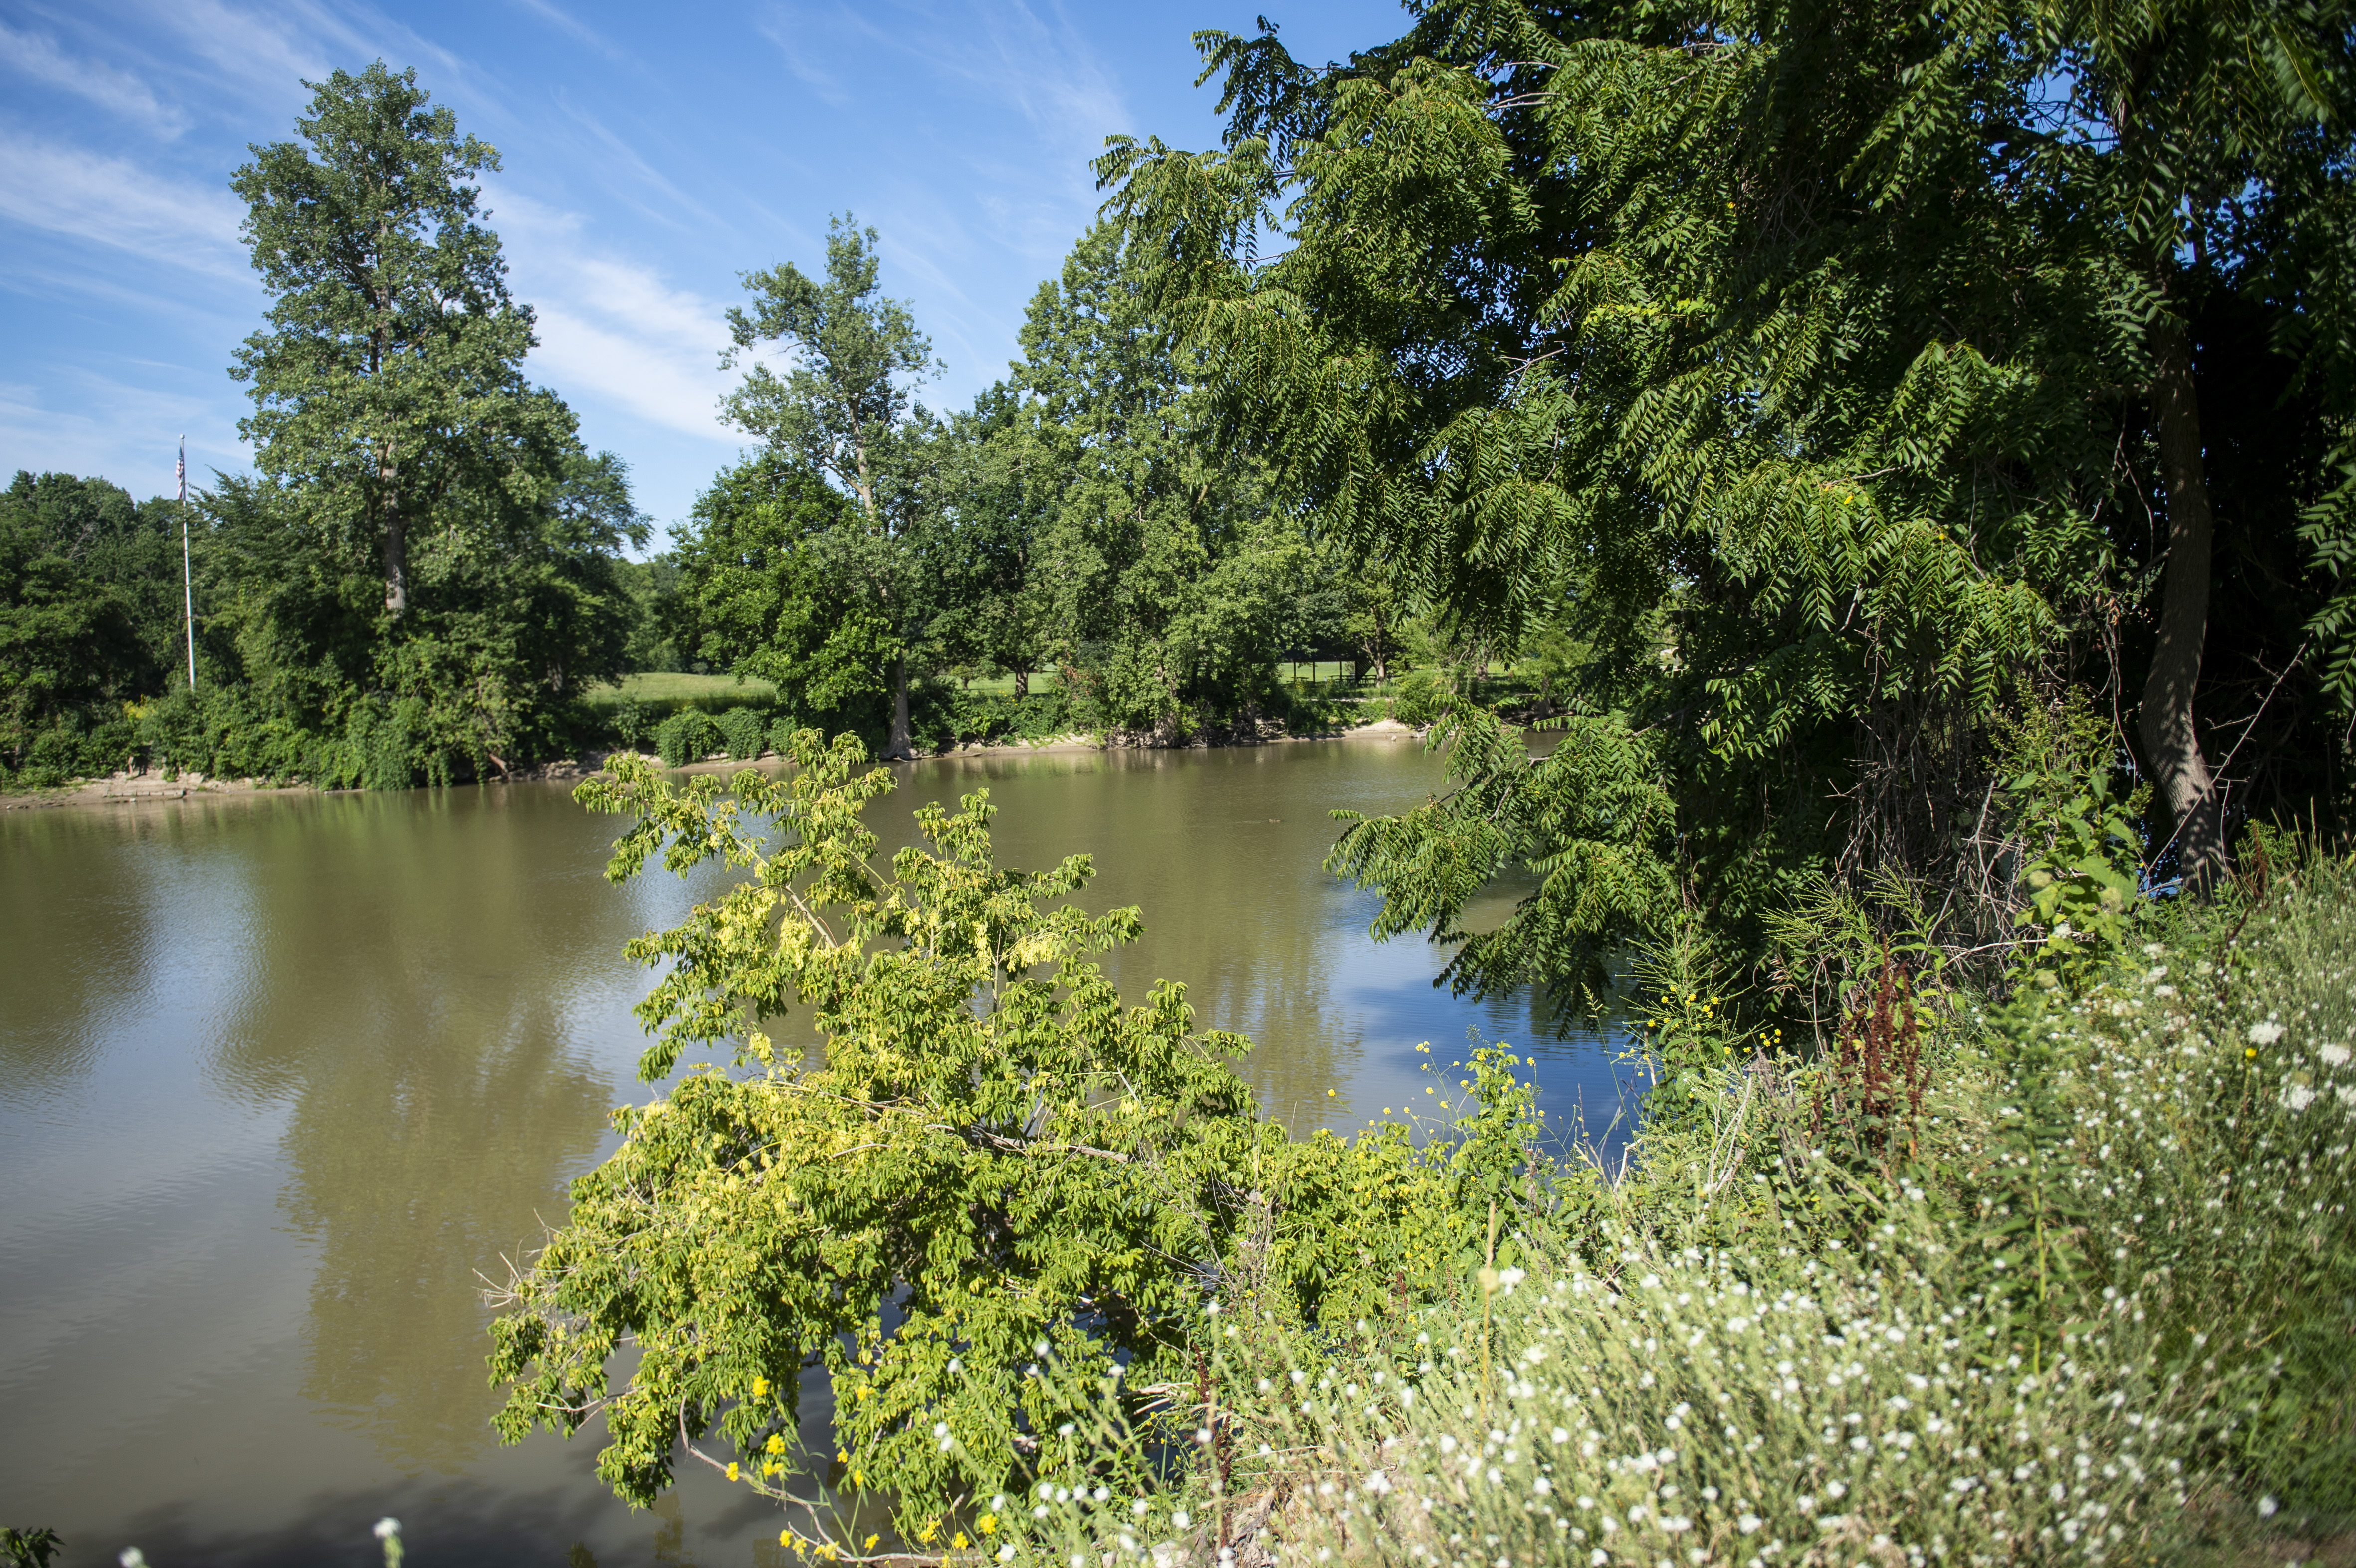 A view of the Tittabawasse River near the Tridge in Midland on Thursday, July 30, 2020. The devastating flood in May gushed over the majority of land in this area. (Kaytie Boomer | MLive.com)